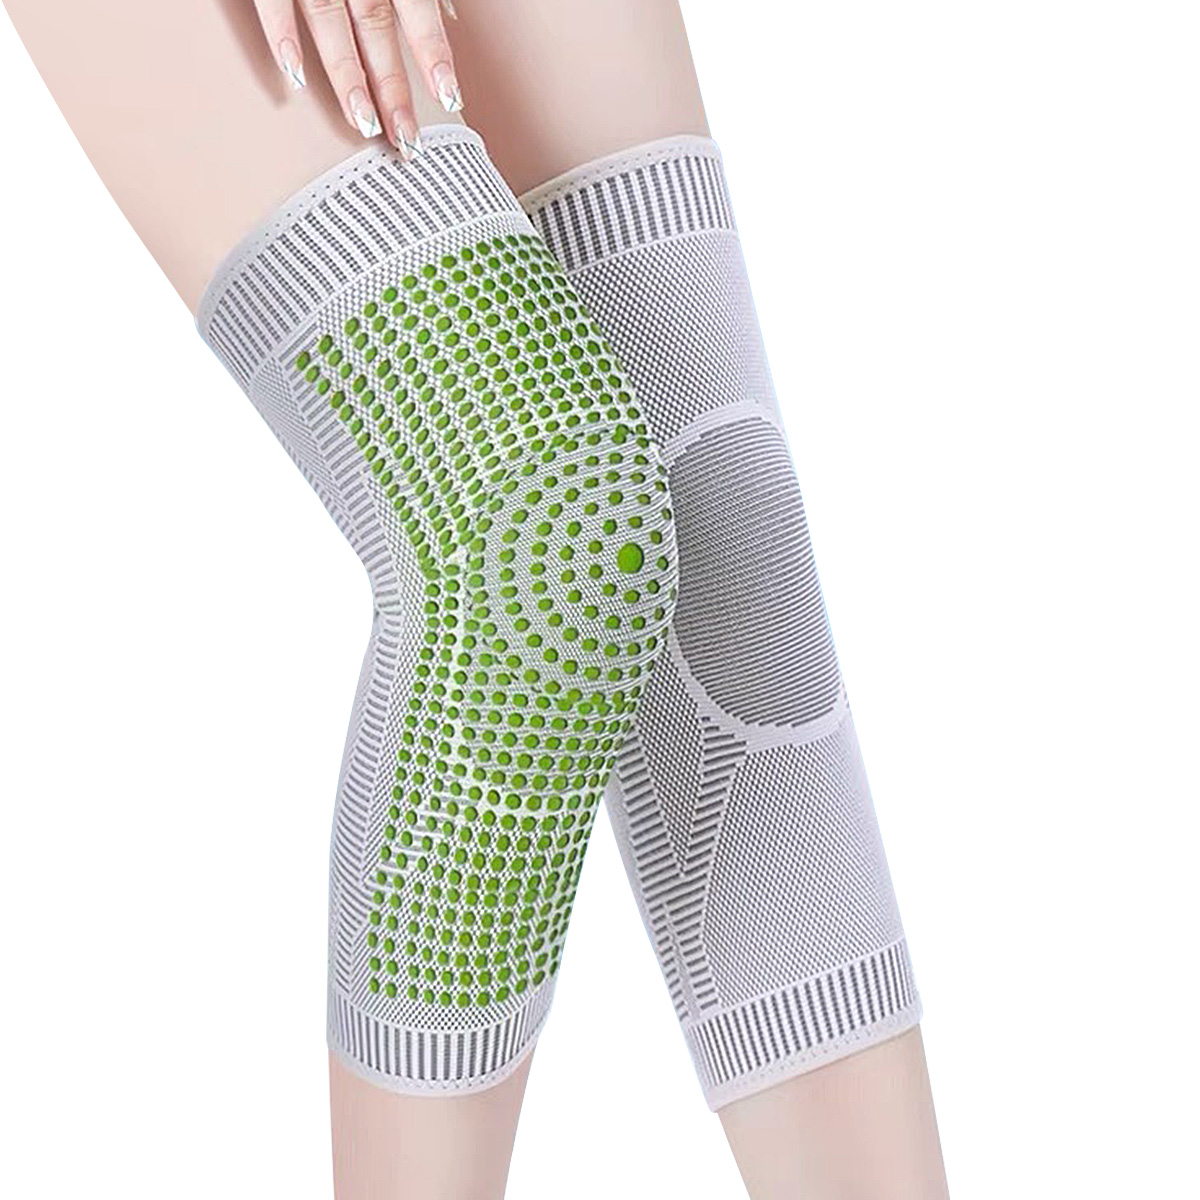 Knitting Warm Compression Medical Knee Support Featured Image